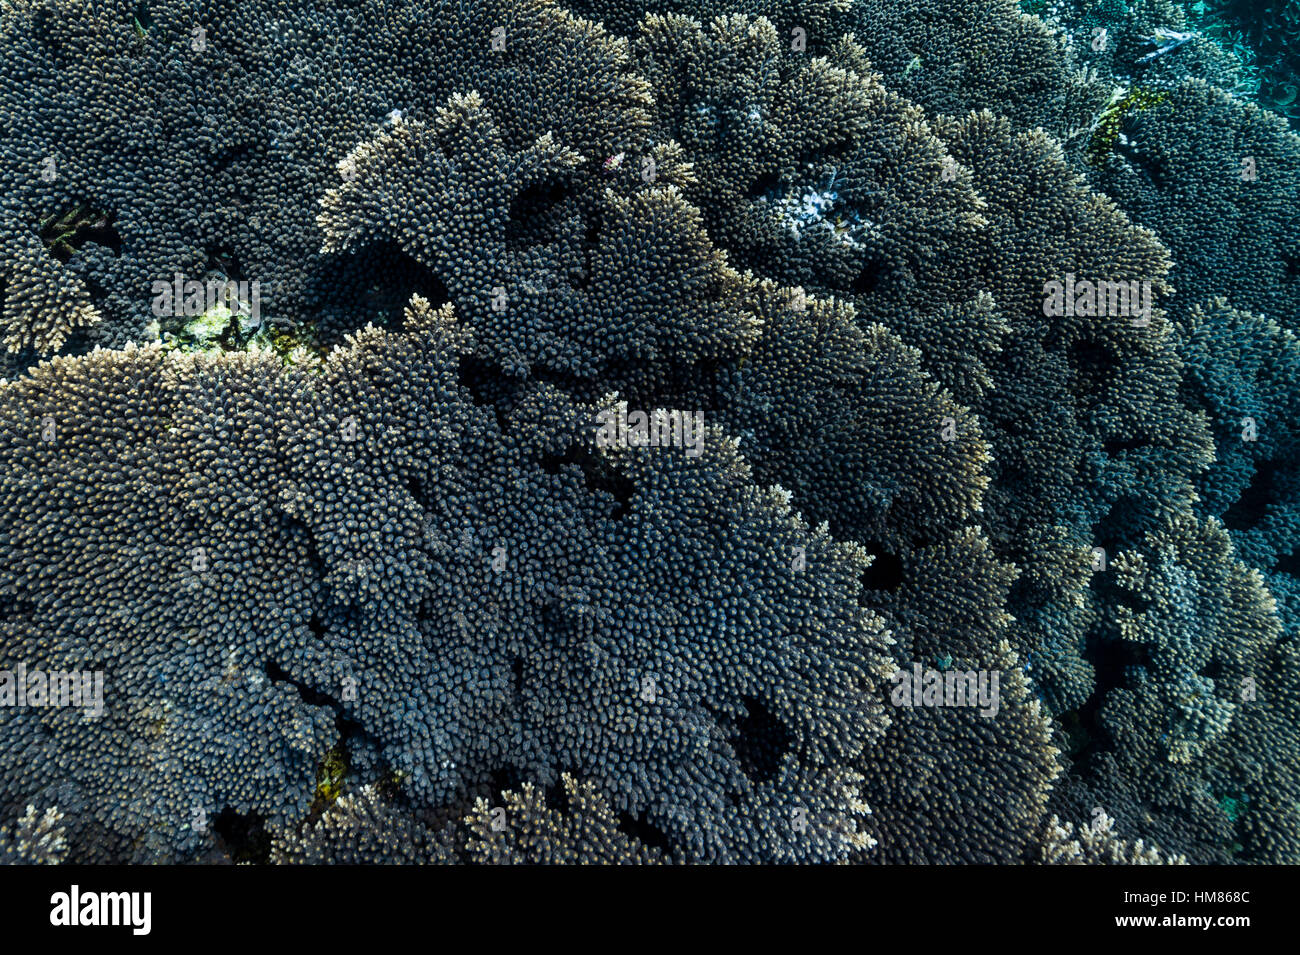 Layers of healthy Table Coral reef growing on top of a volcanic lava flow in a shallow tropical sea. Stock Photo